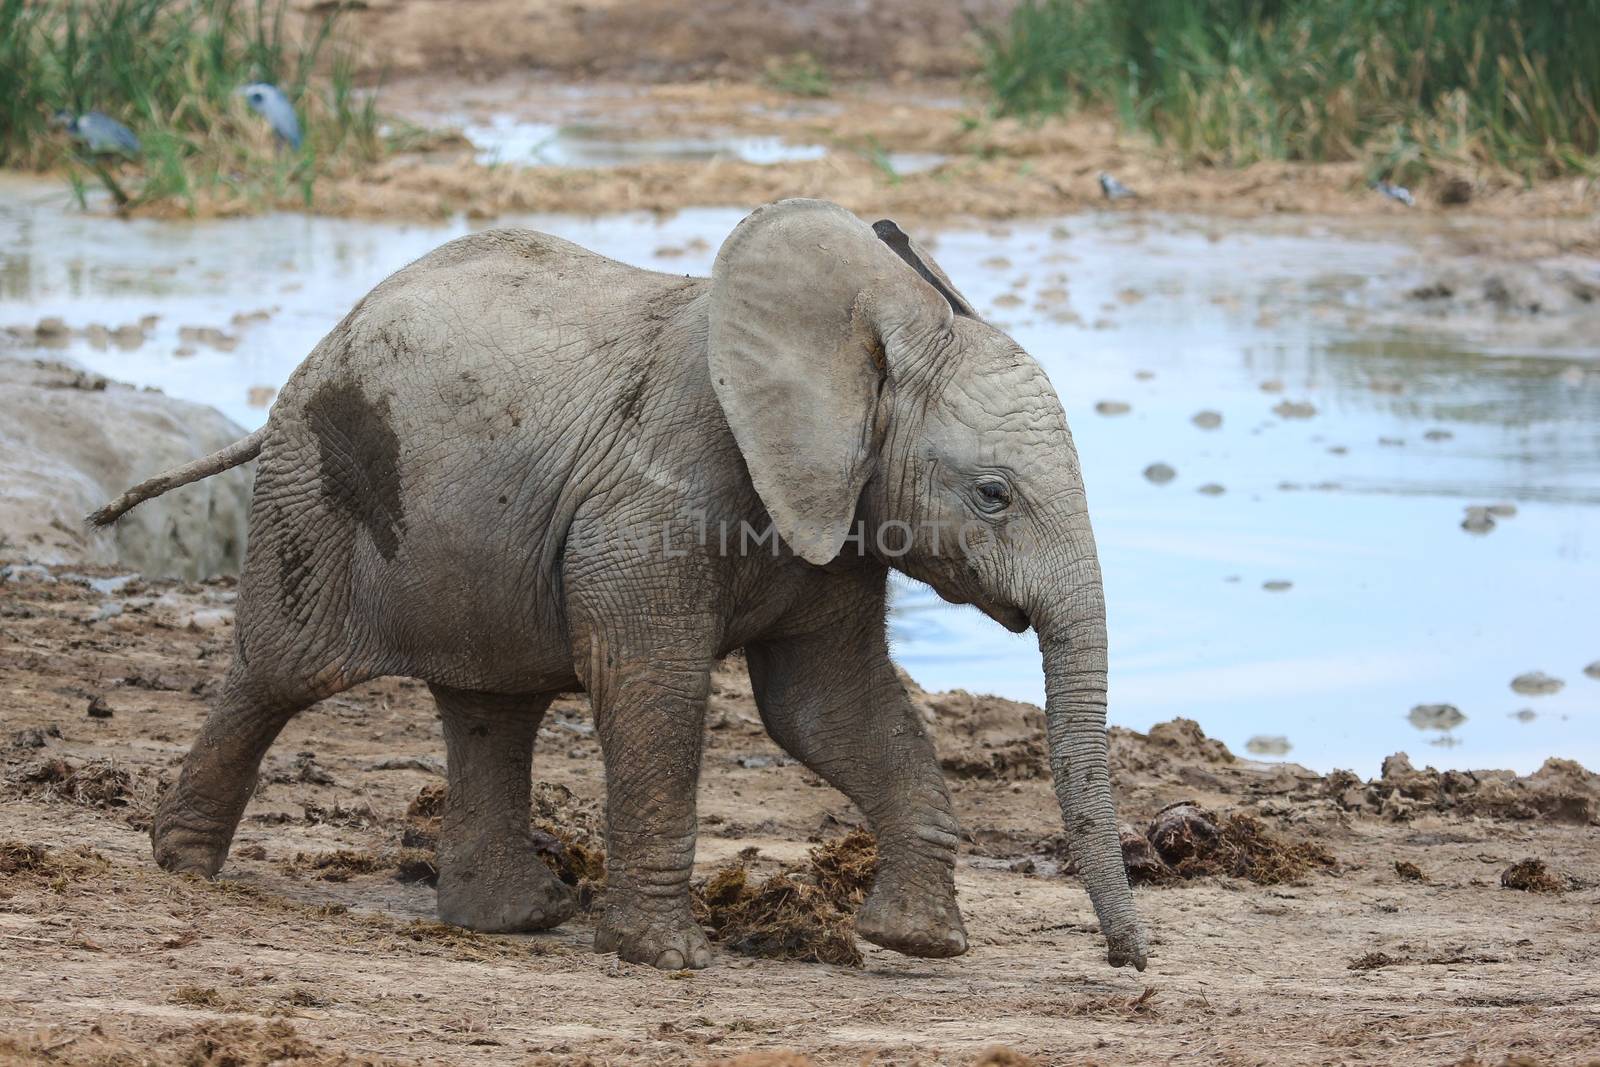 Cute baby African elephant running to the water